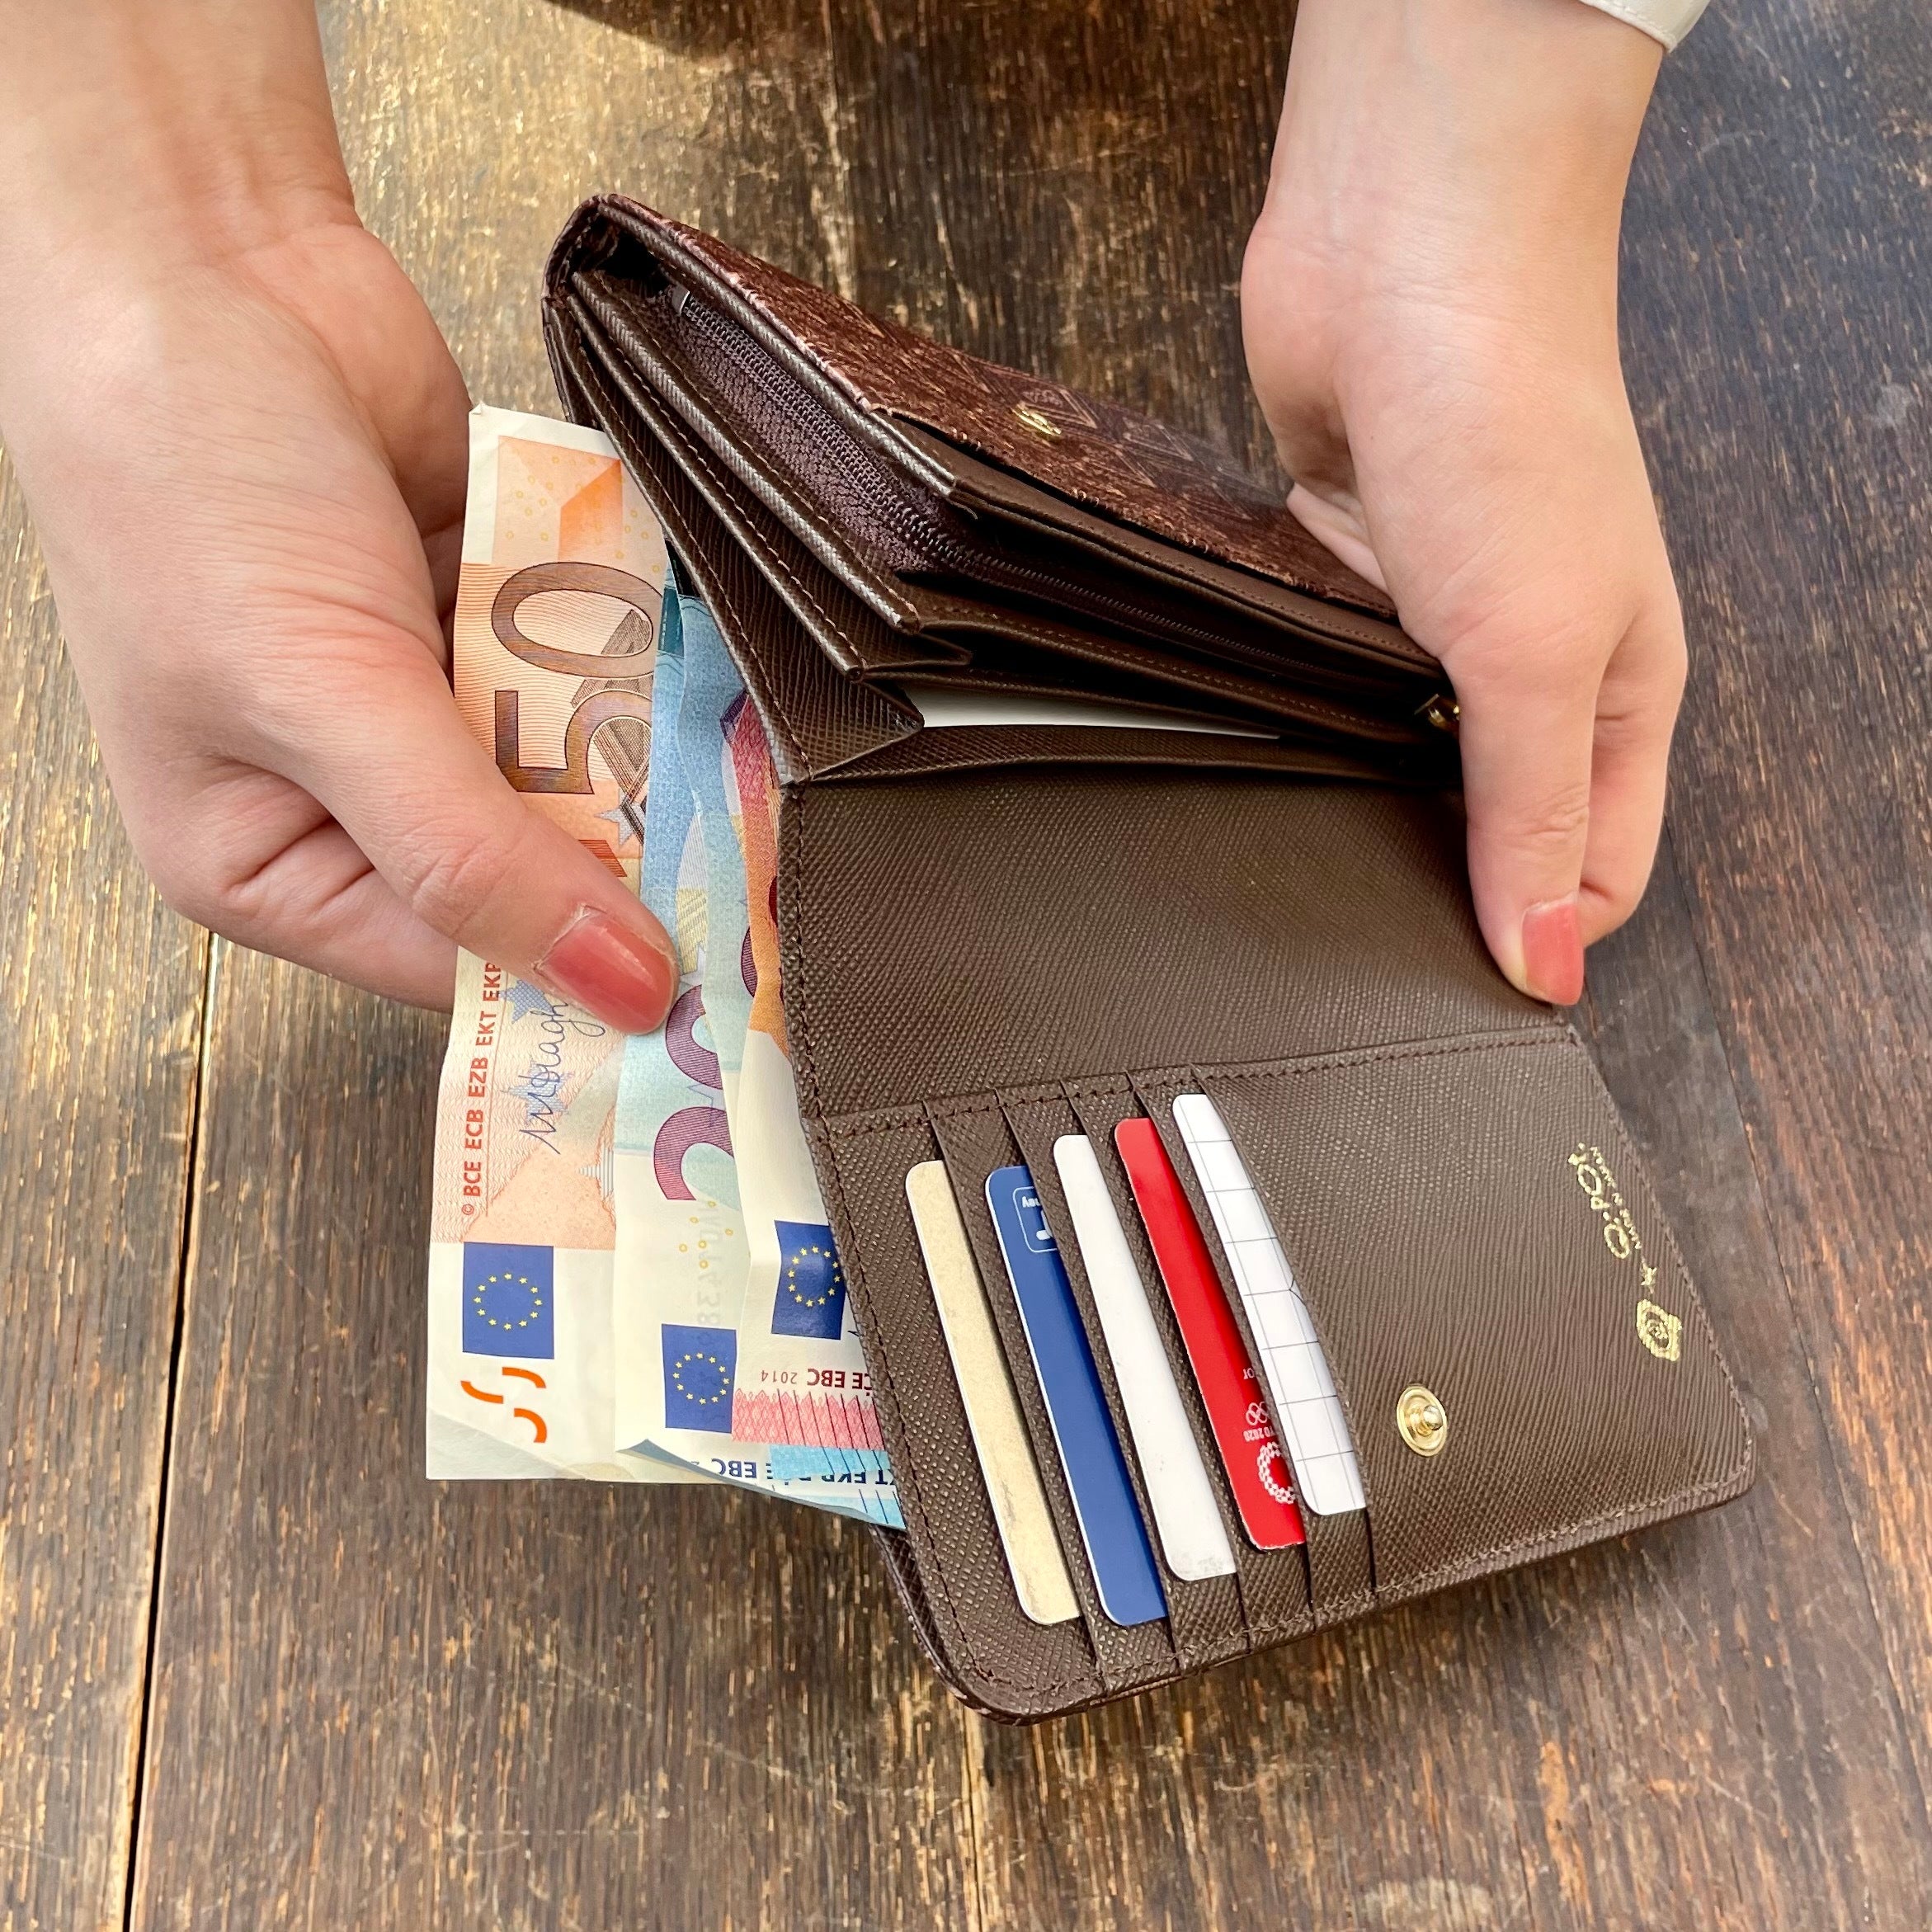 Bitter Chocolate Leather Short Wallet【Japan Jewelry】